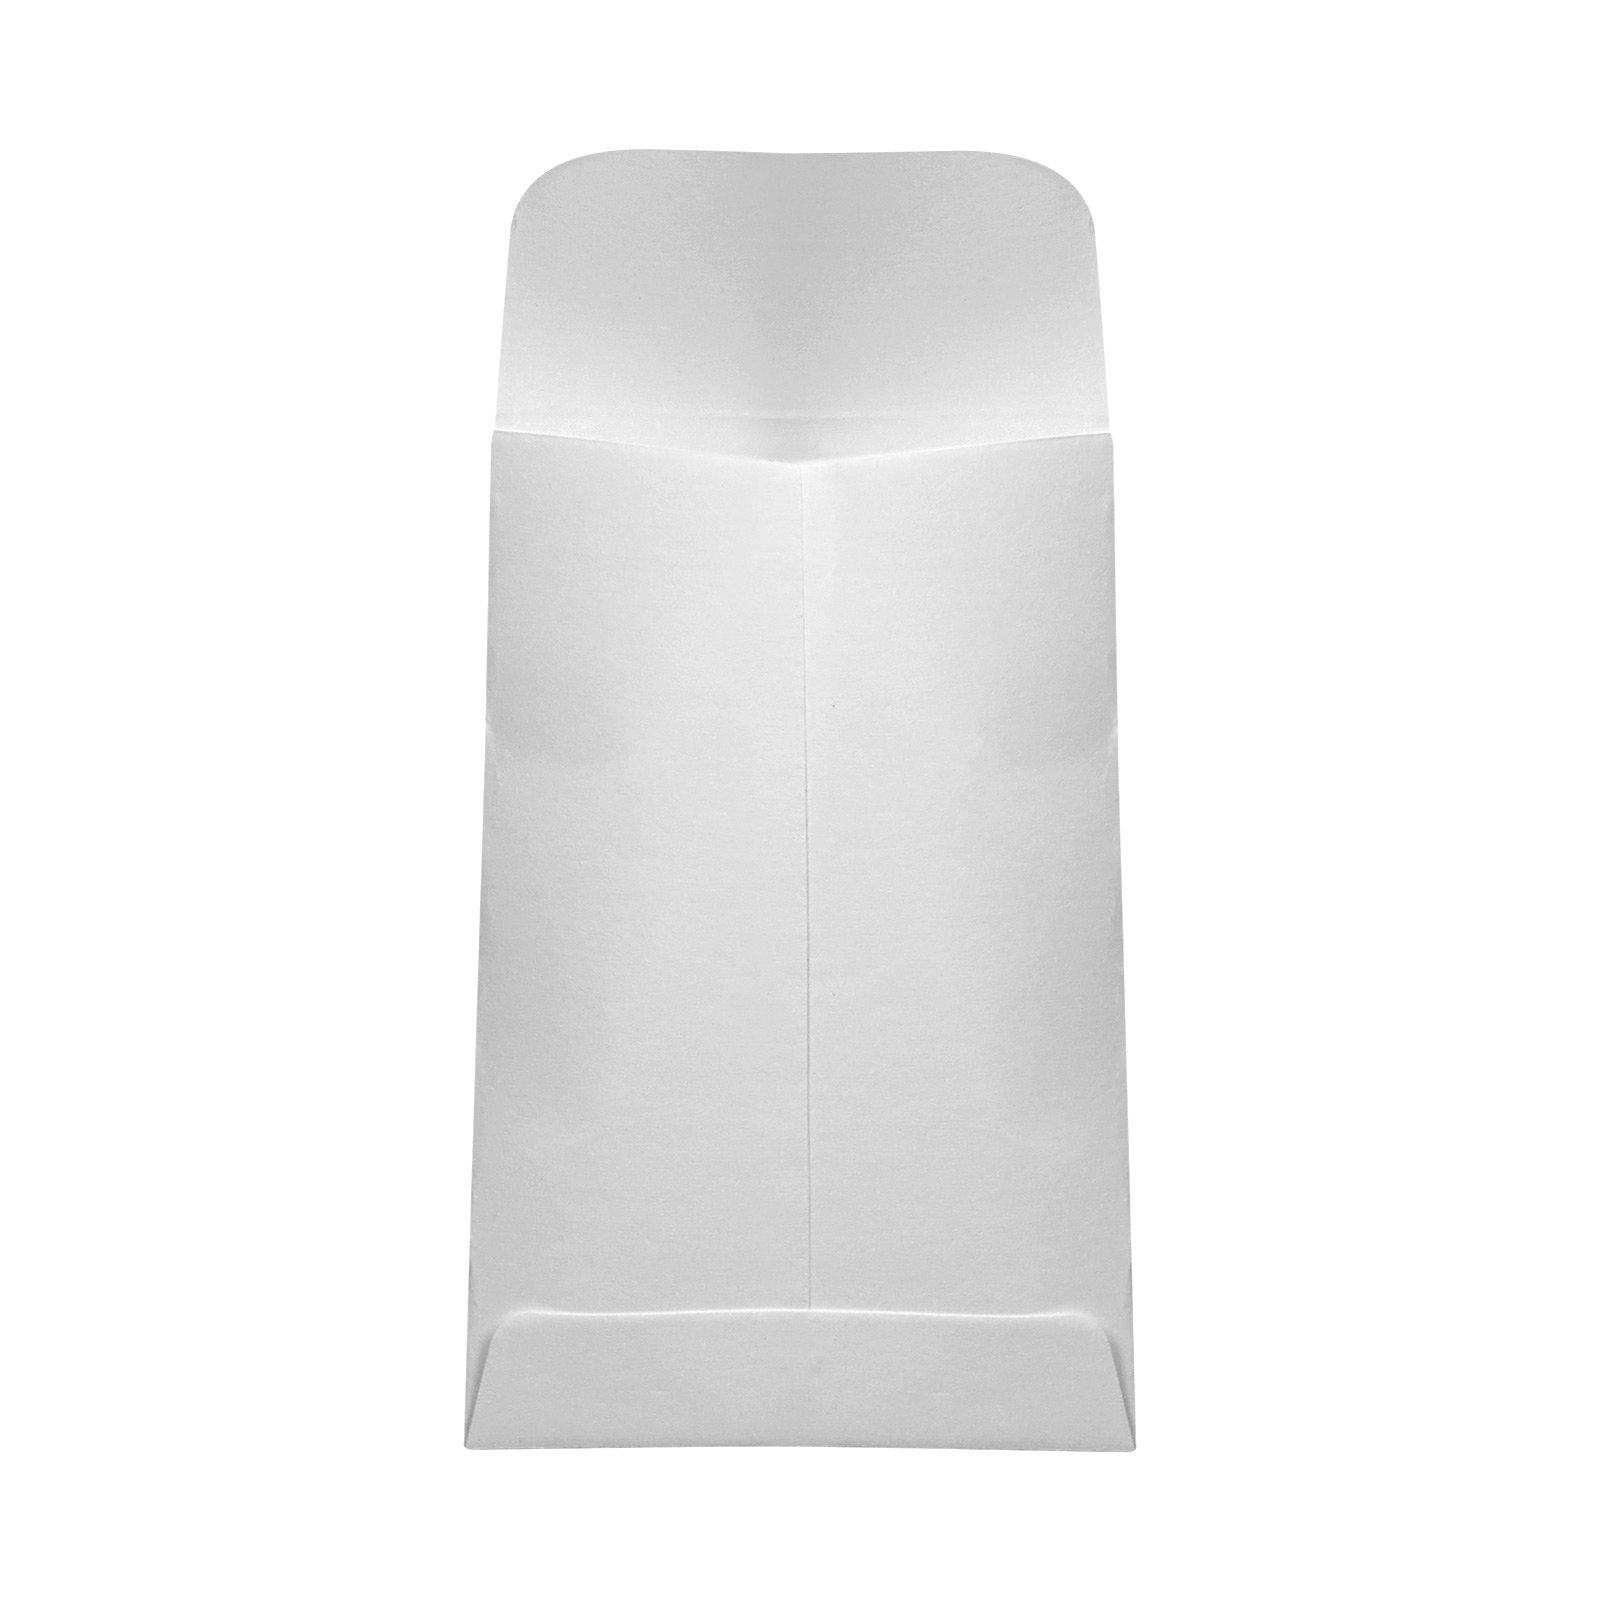 2.25" x 3.5" Concentrate Container Envelope White 500 Count at Flower Power Packages